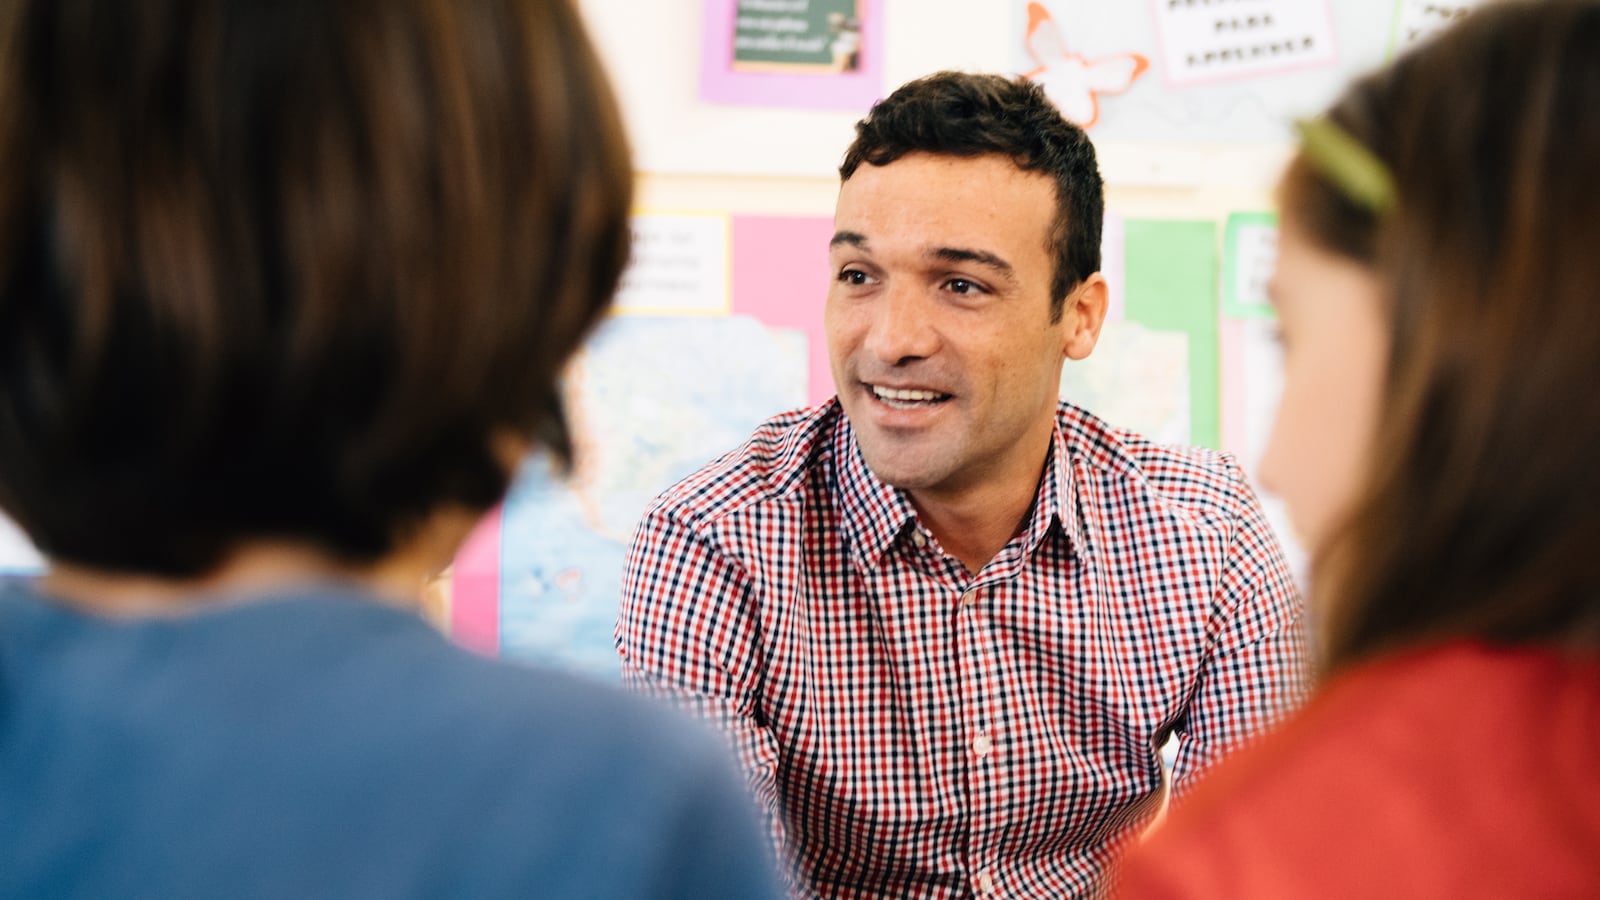 Man in button down shirt talks to young children in a school setting. 